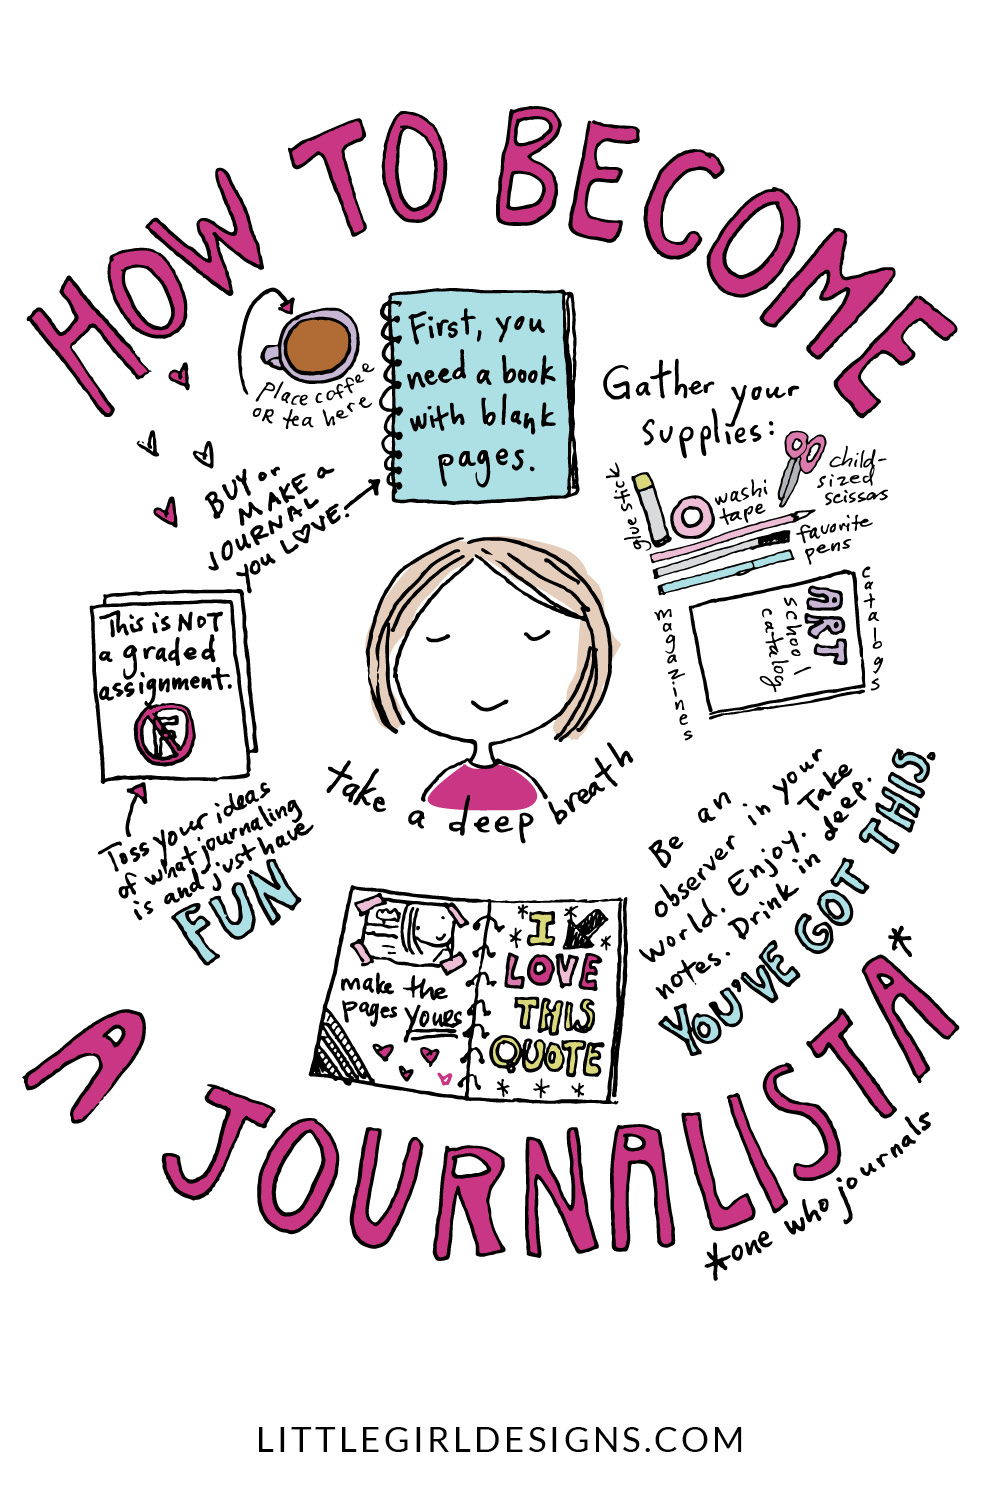 How to Be a Journalista | Journaling Myths & Writing in a Journal